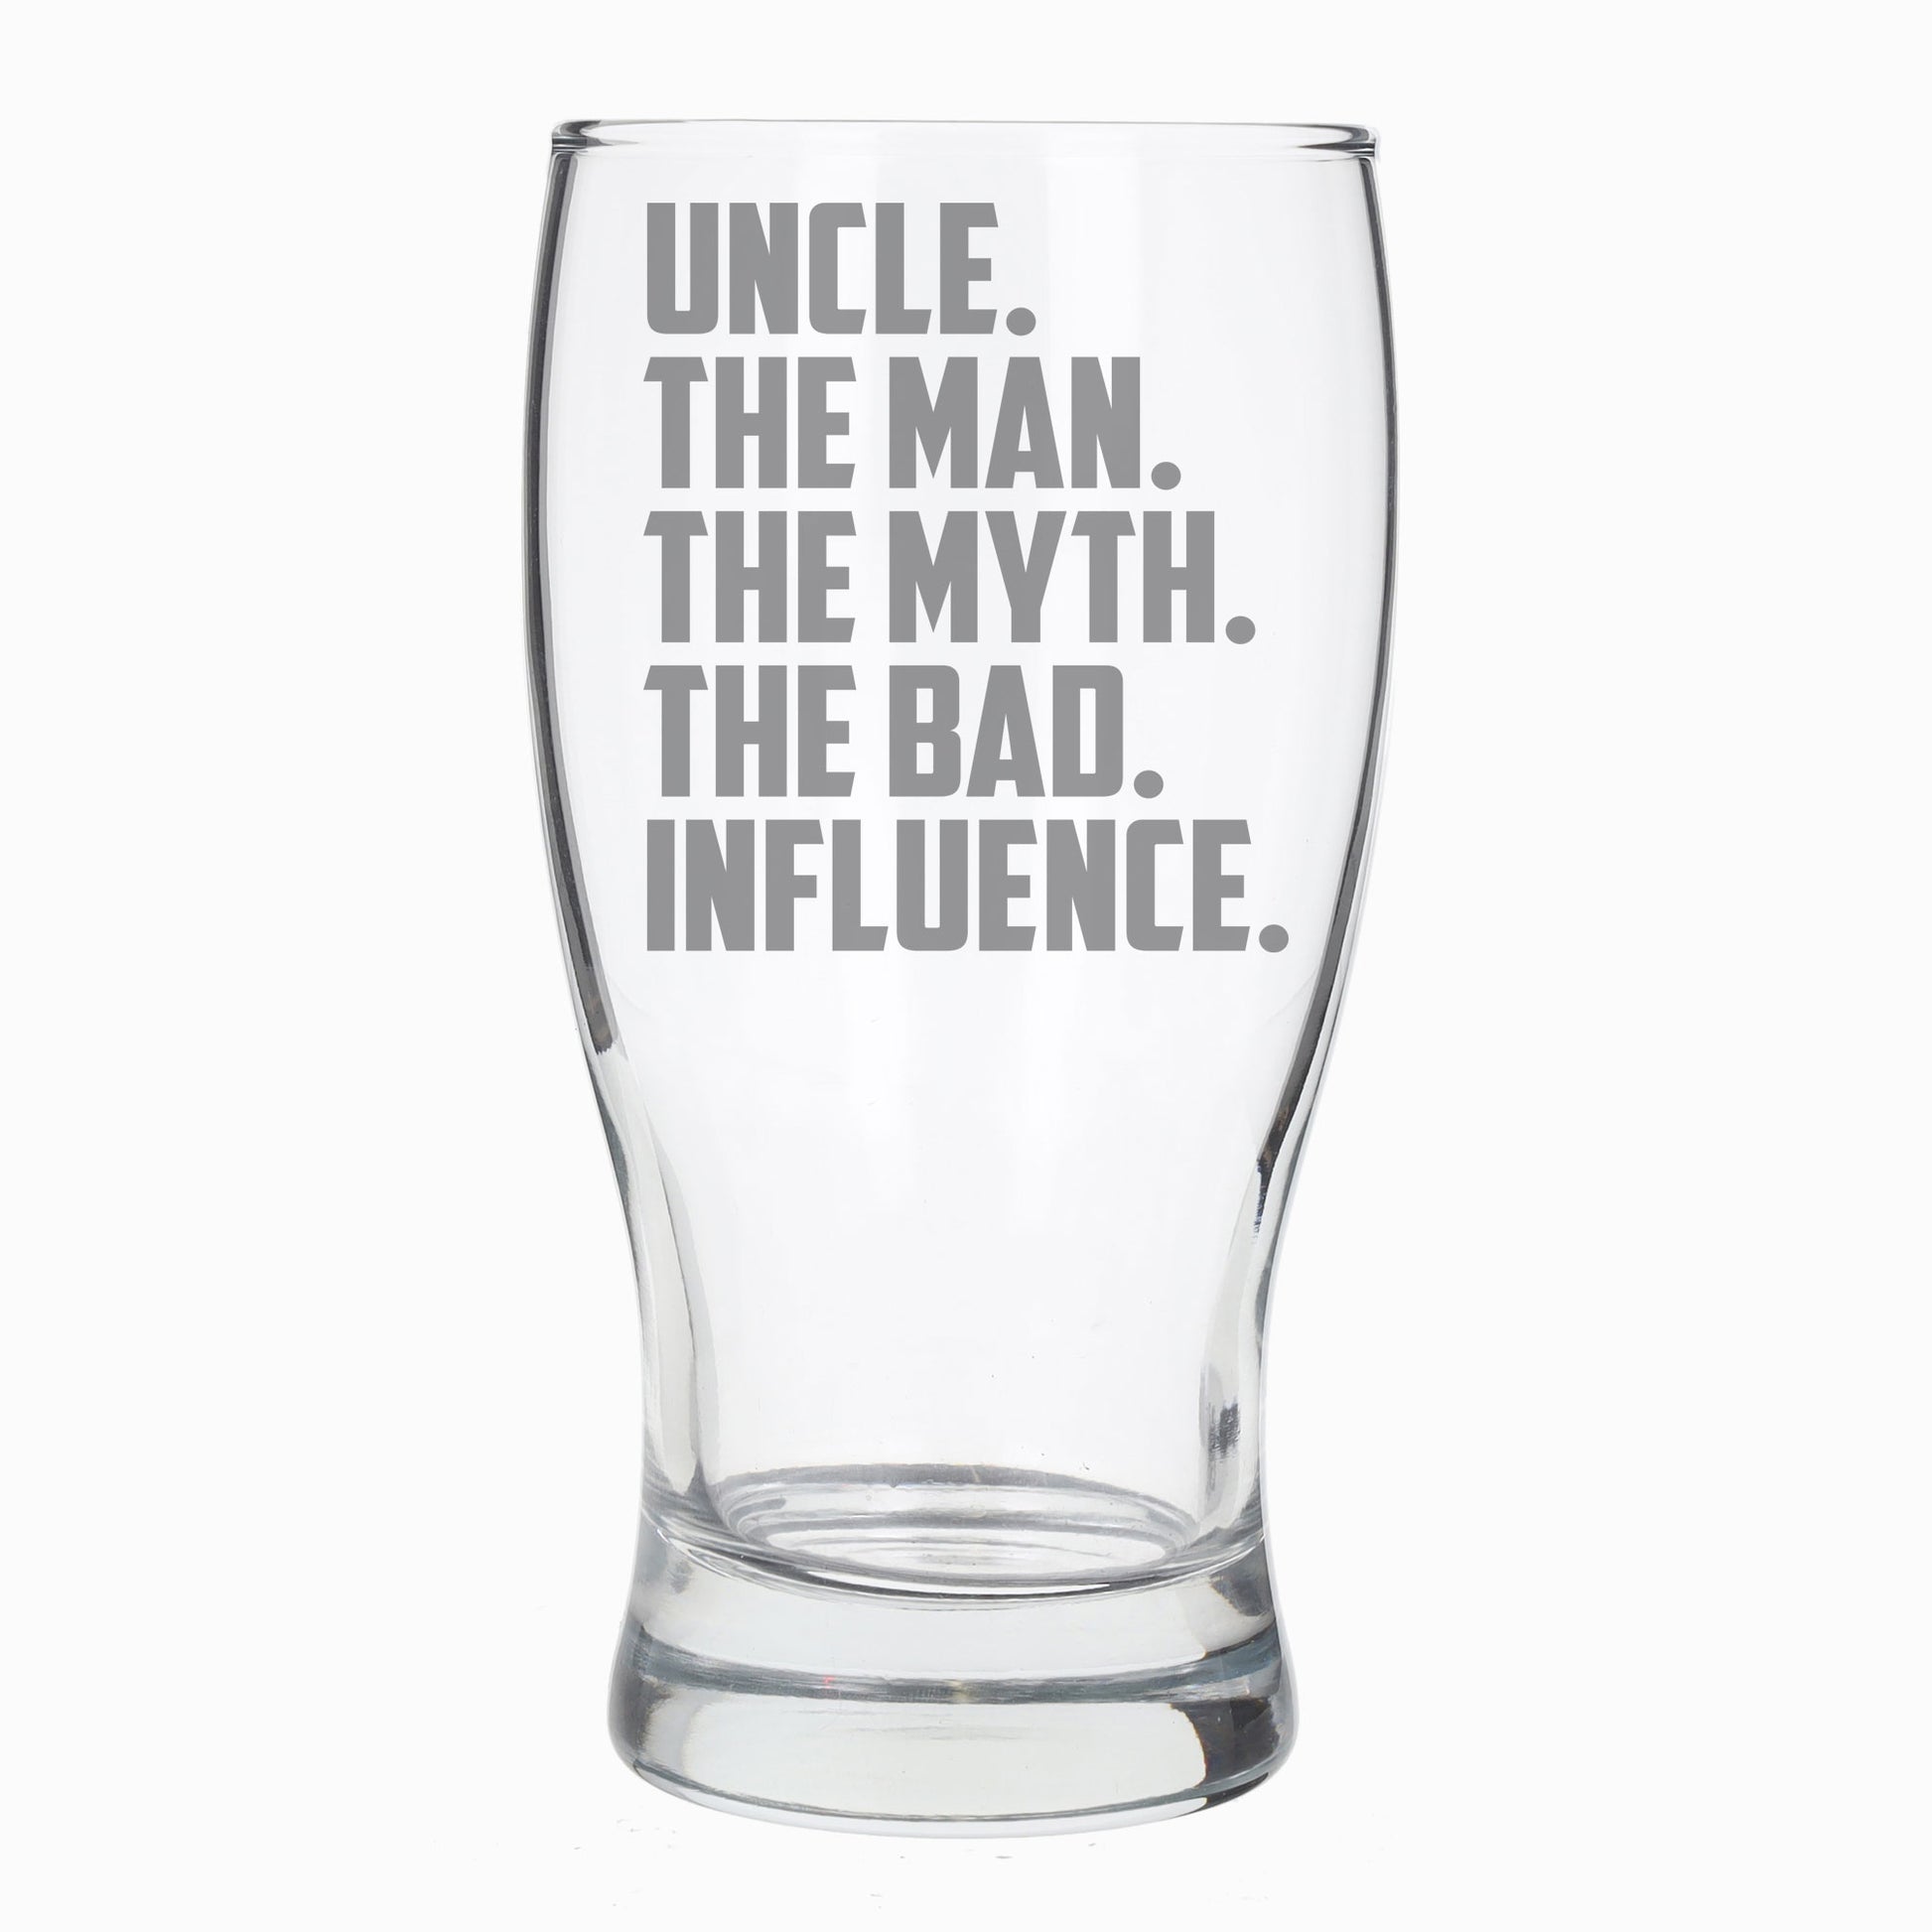 Uncle, The Man, The Myth, The Bad Influence Engraved Beer Glass and/or Coaster Set  - Always Looking Good - Beer Glass Only  